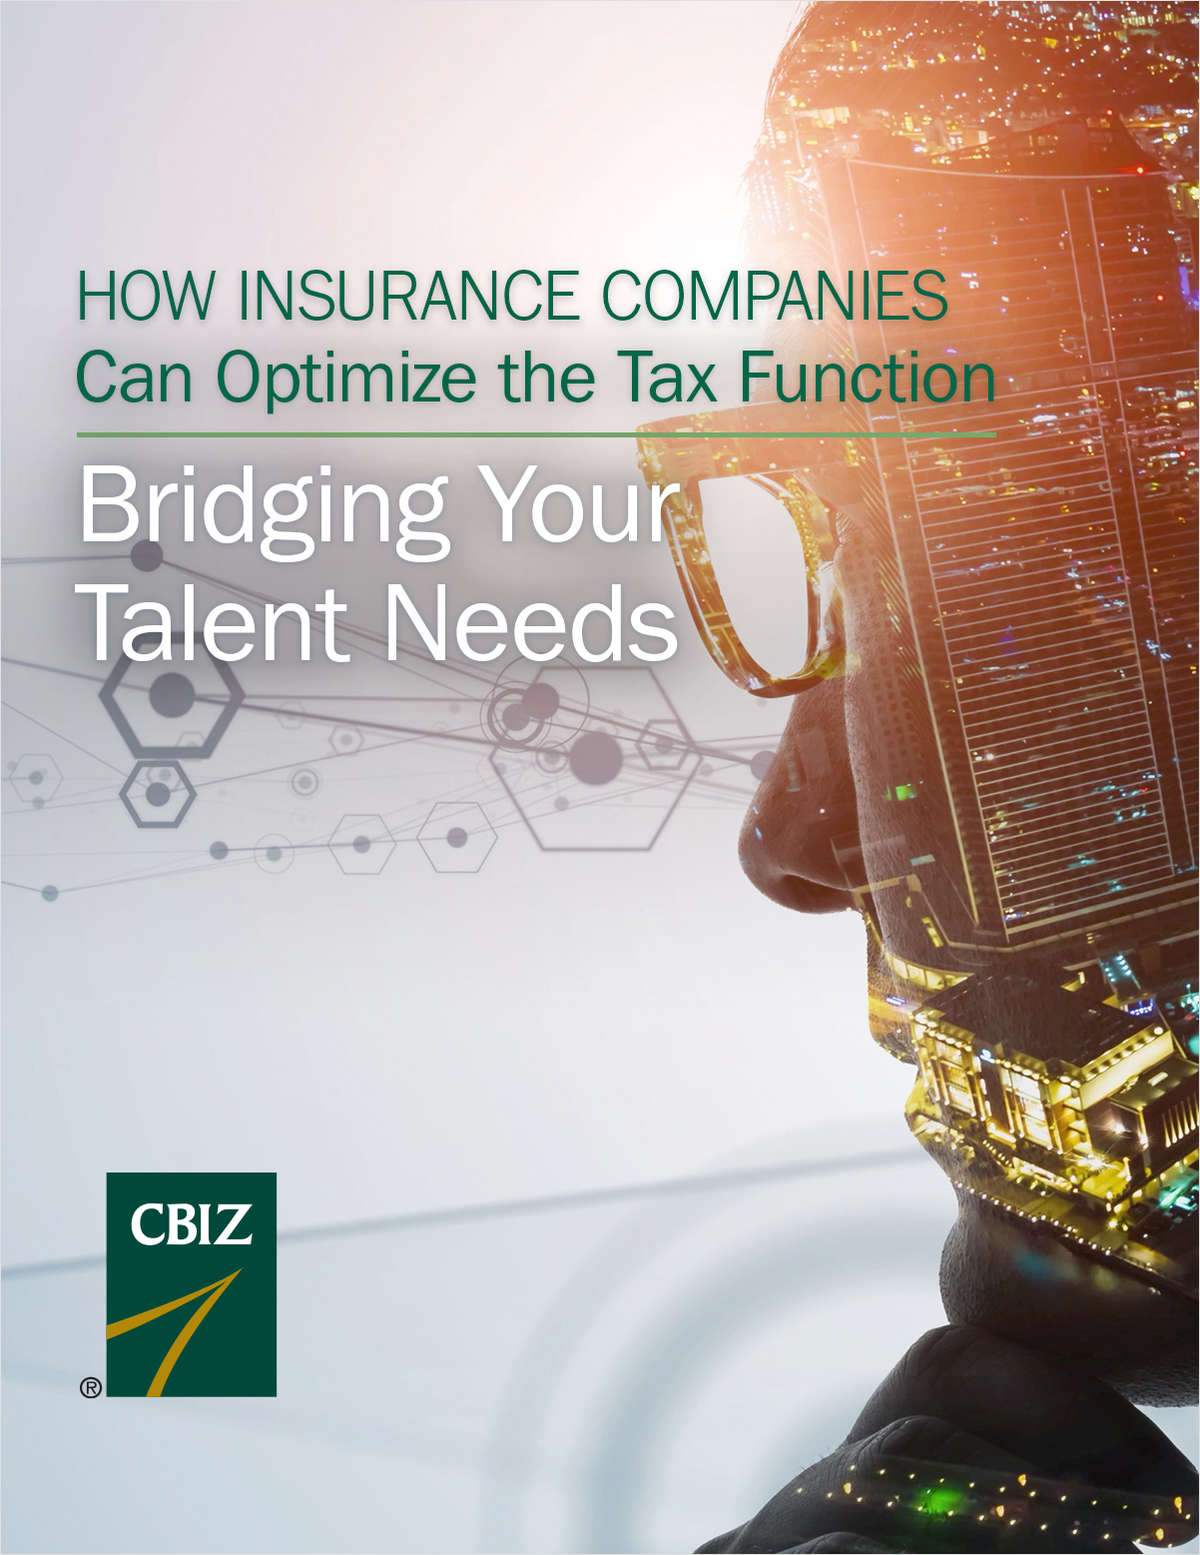 How Insurance Companies Can Optimize the Tax Function: Boosting Teams Through Co-Sourcing